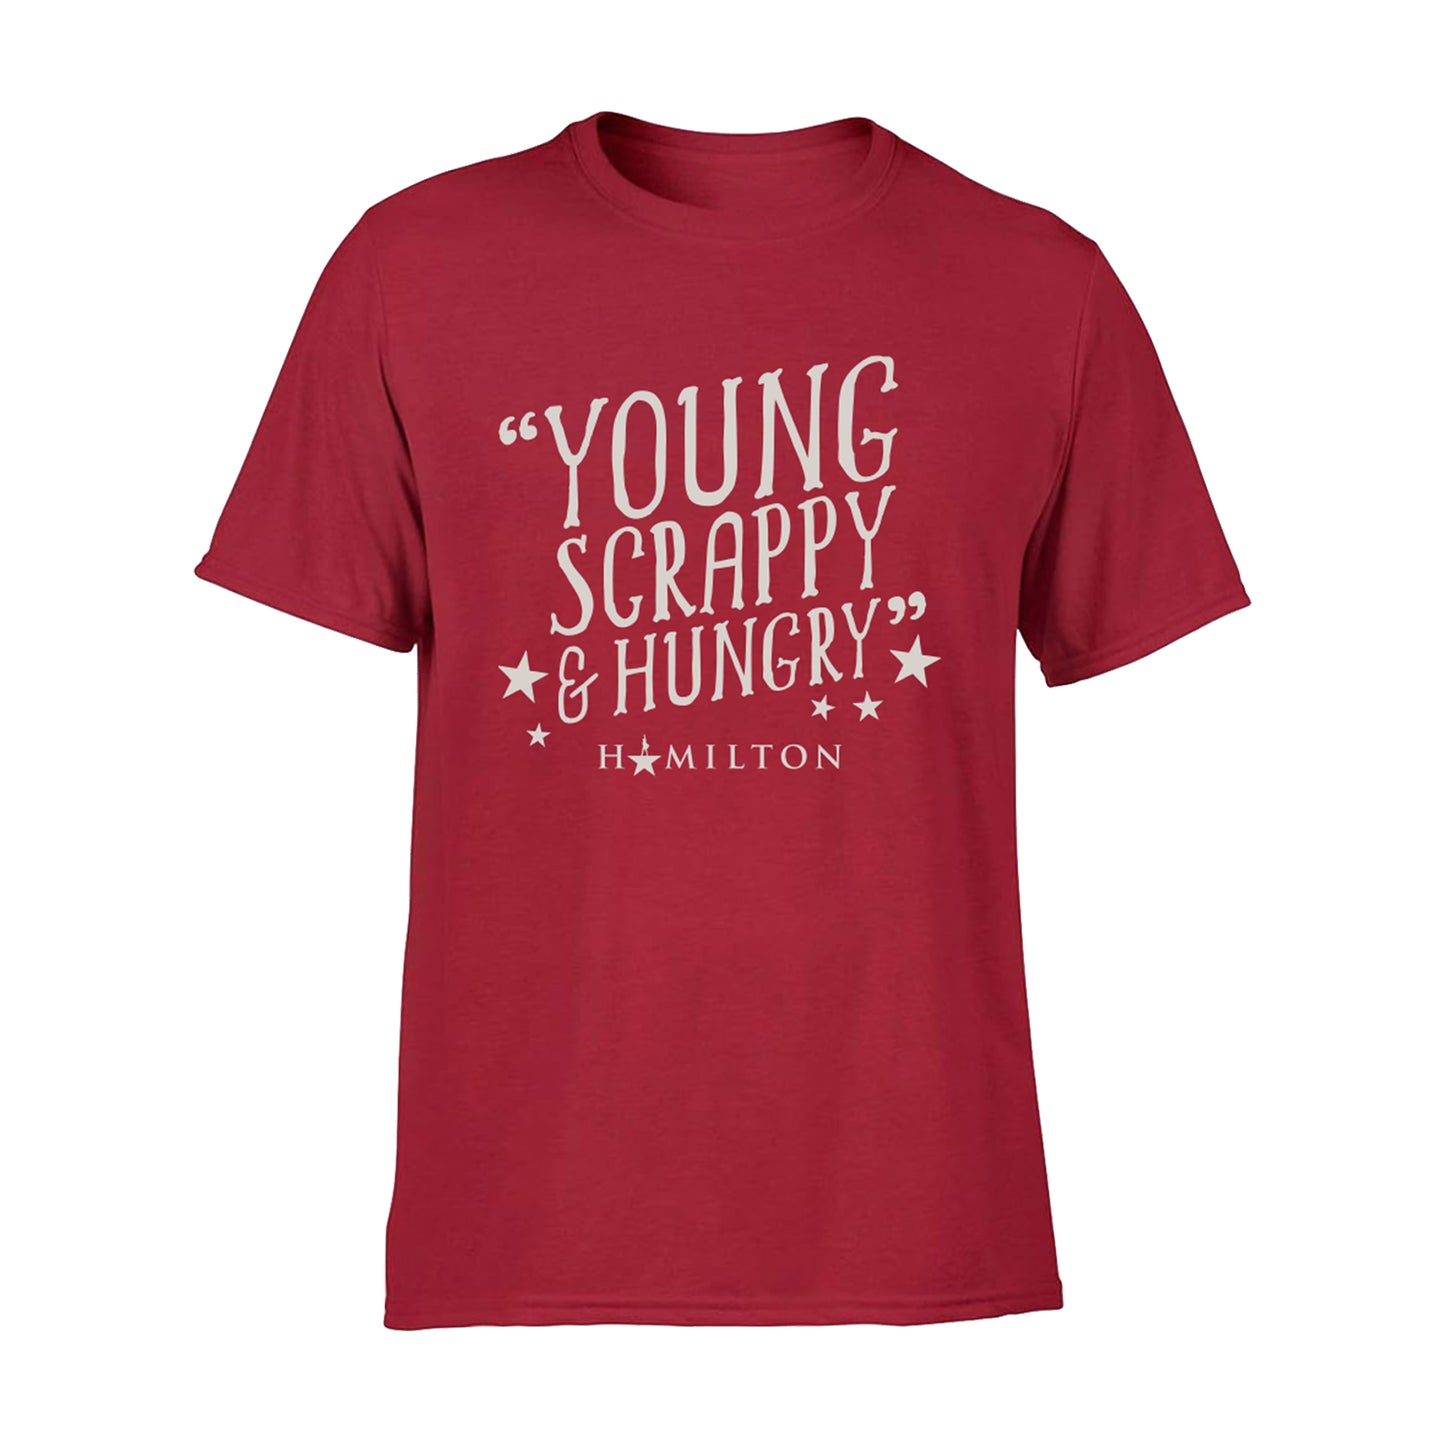 Hamilton - Young, Scrappy & Hungry Tee